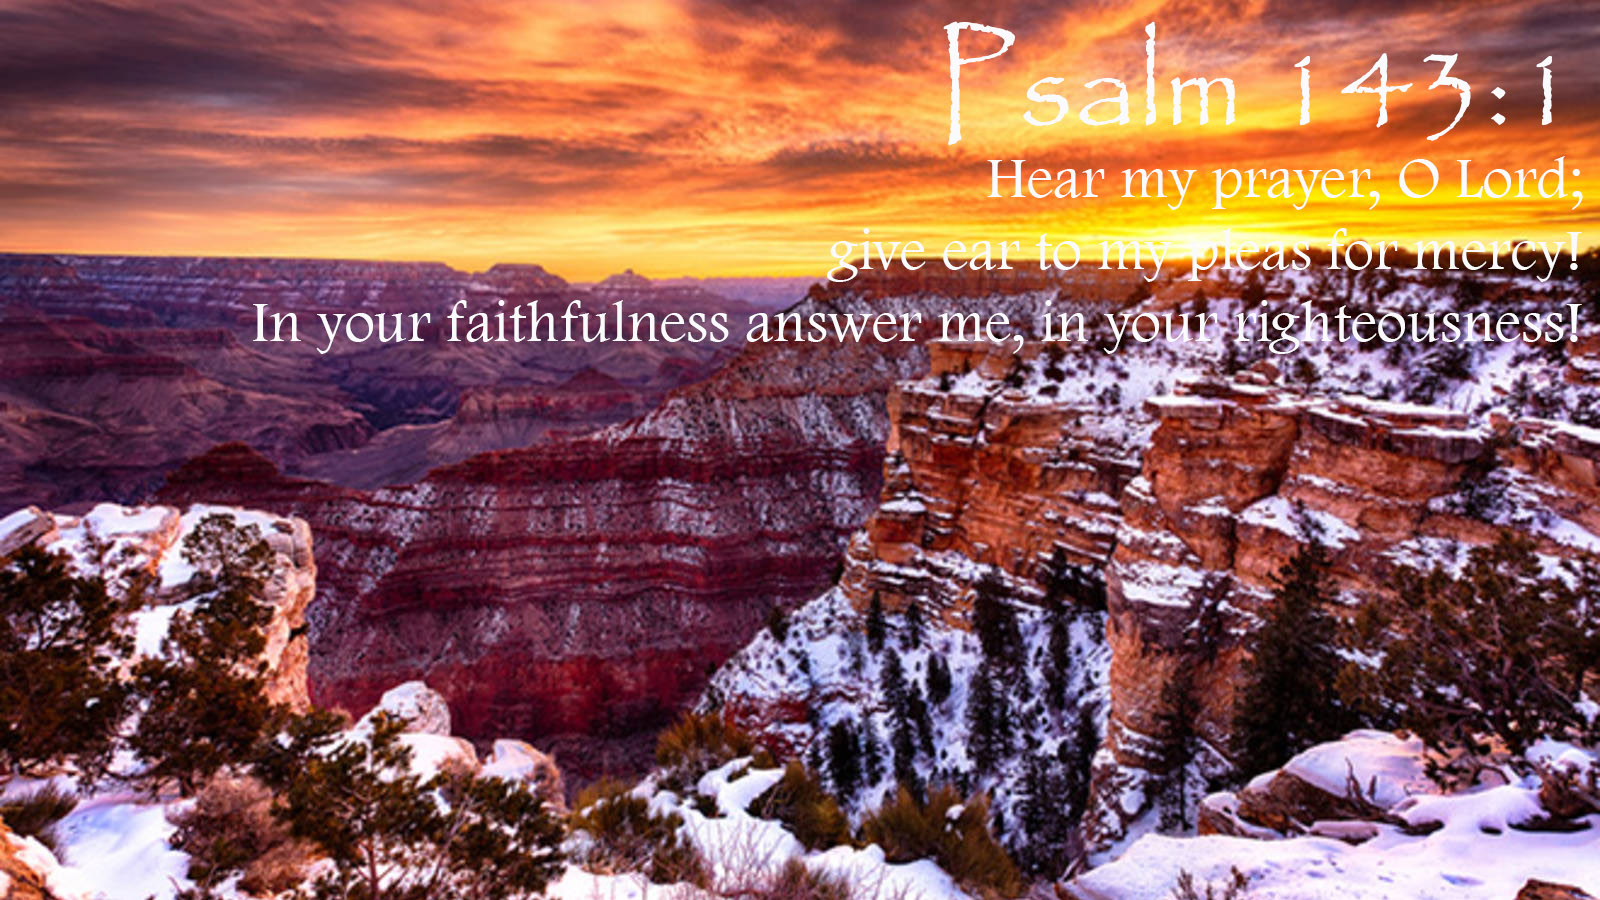 God's Steadfast Love! Friday, October 9, 2020 Daily Devotion (Grand Canyon National Park)